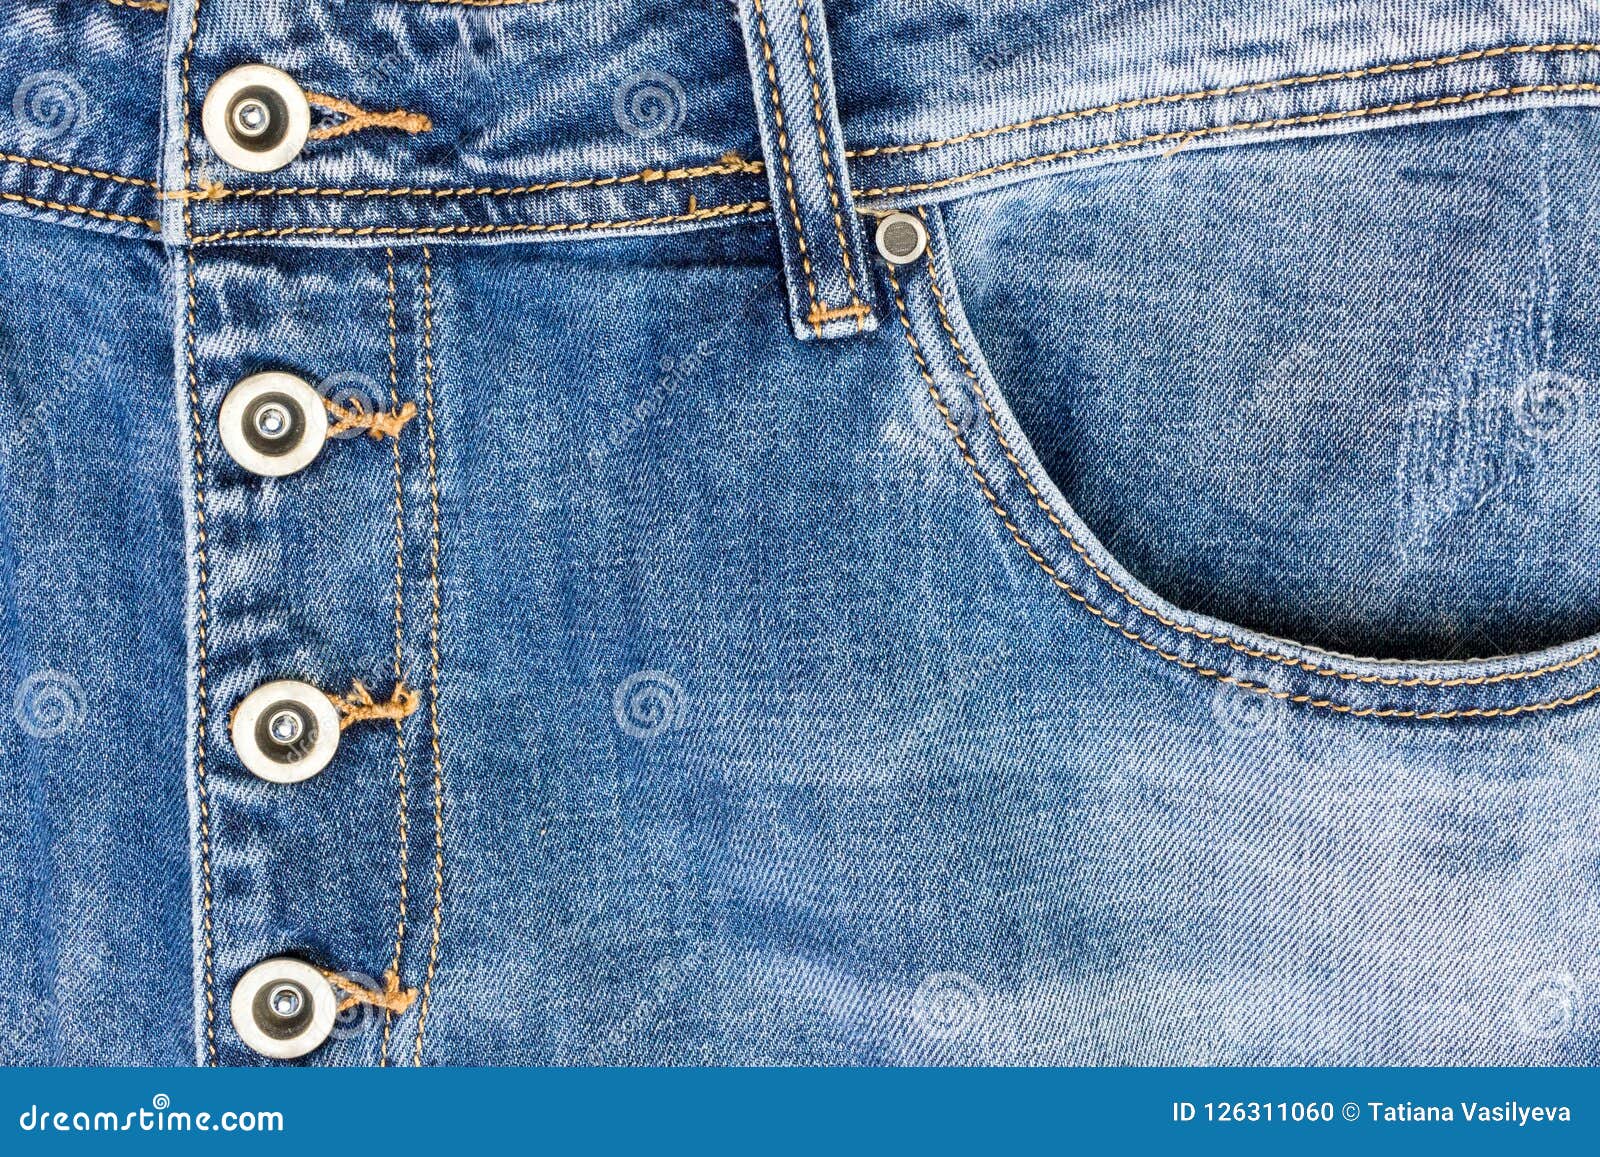 Pocket of Jeans, Clasp Jeans for Metal Buttons Stock Photo - Image of ...